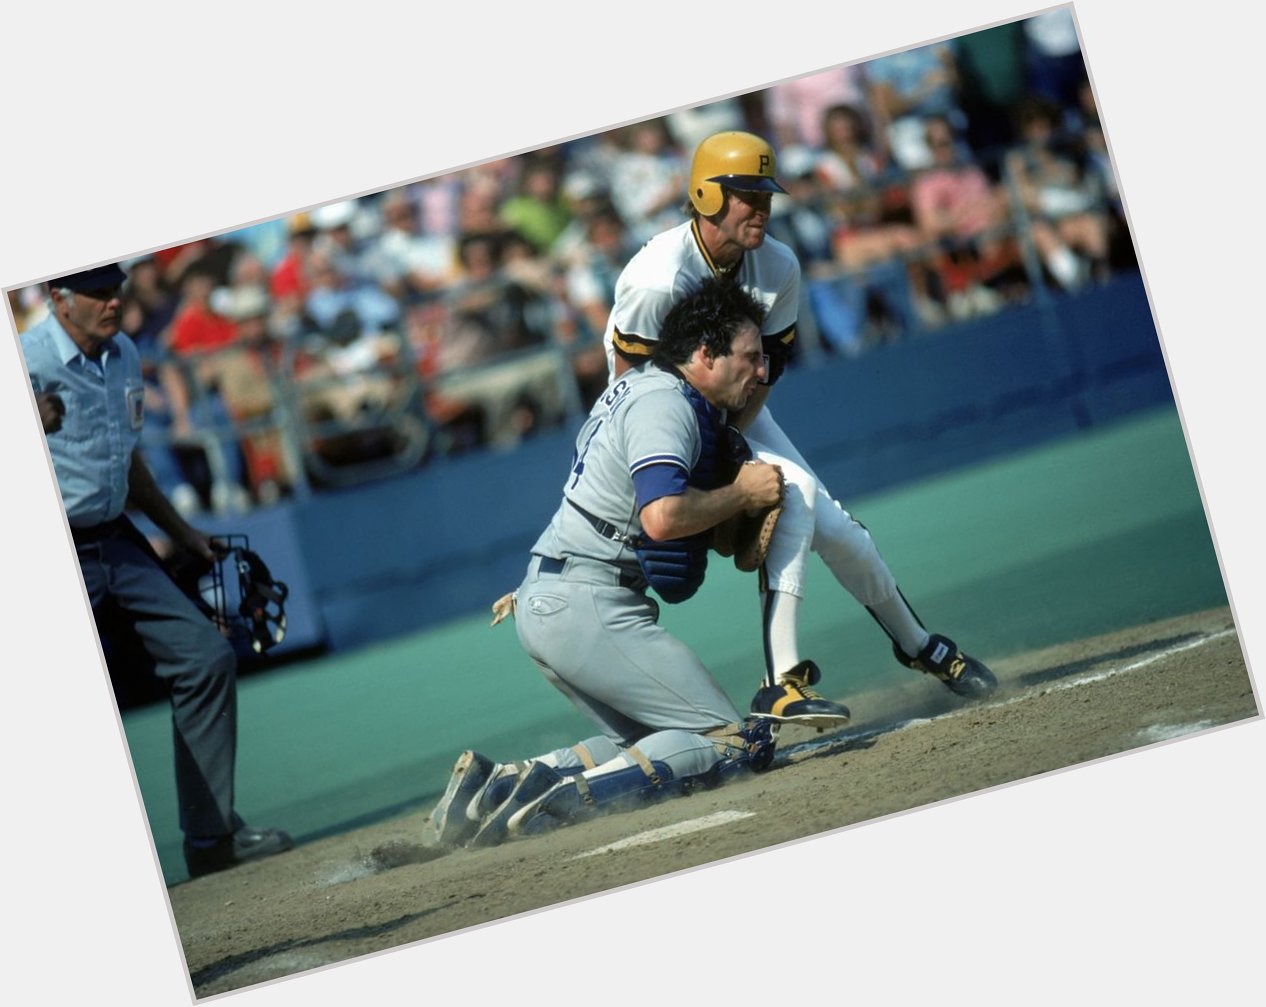 Happy \80s Birthday to Mike Scioscia, who was as tough as they came behind the plate. 